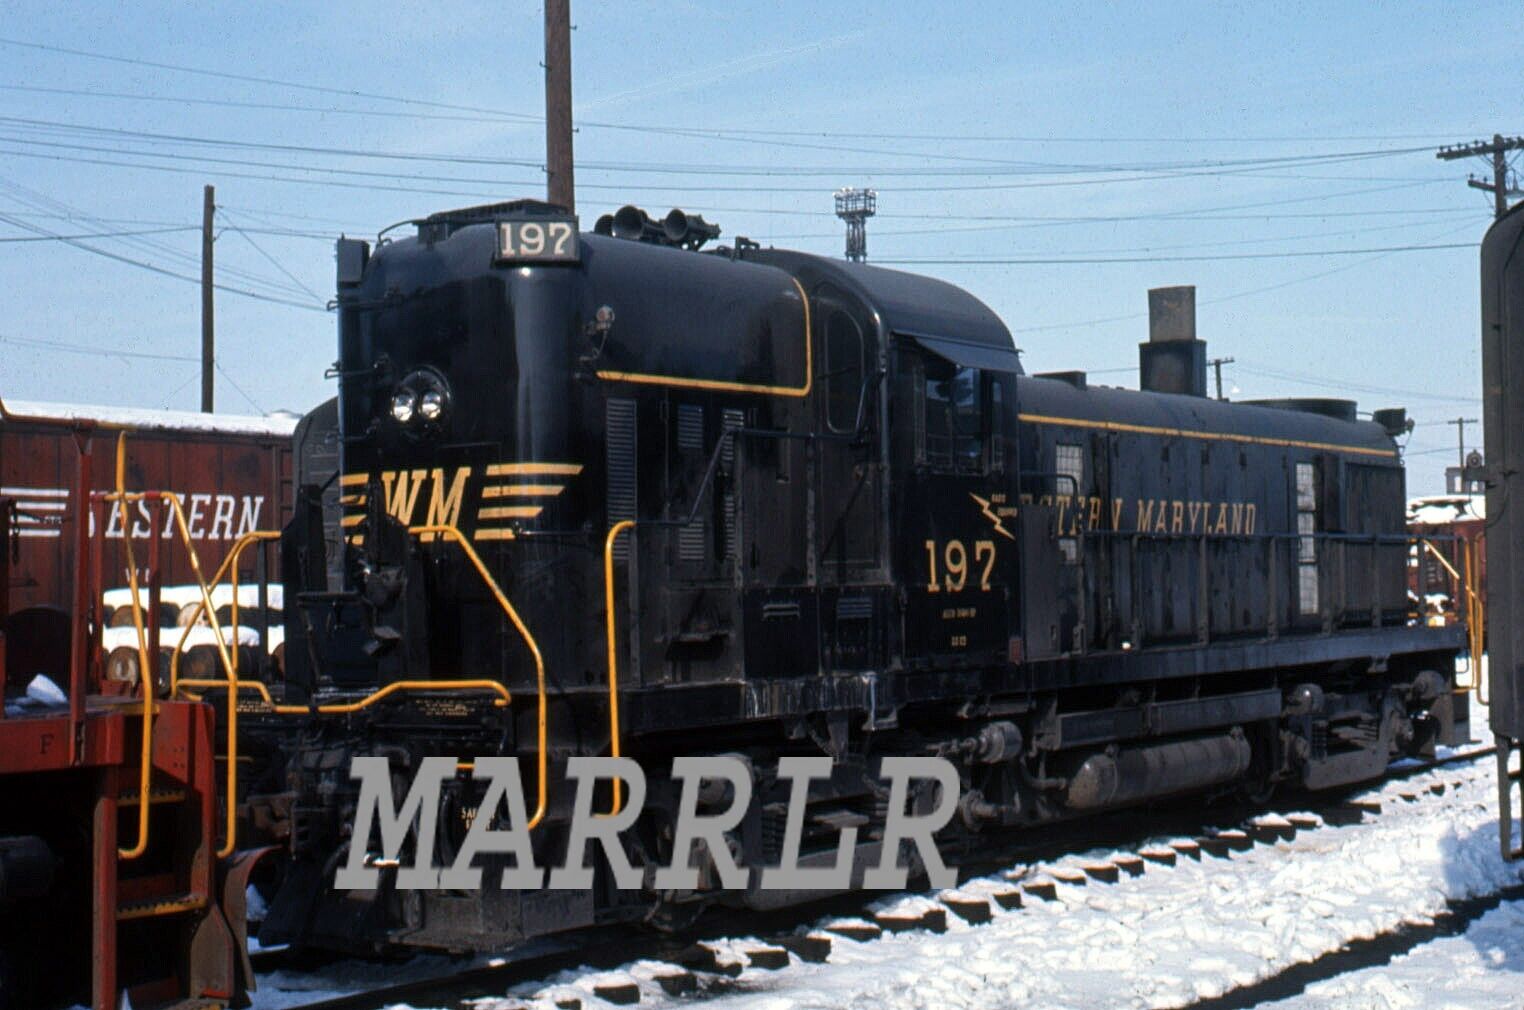 RR LARGE PRINT-WESTERN MARYLAND WM 197 at Hagerstown Md  11/4/1971